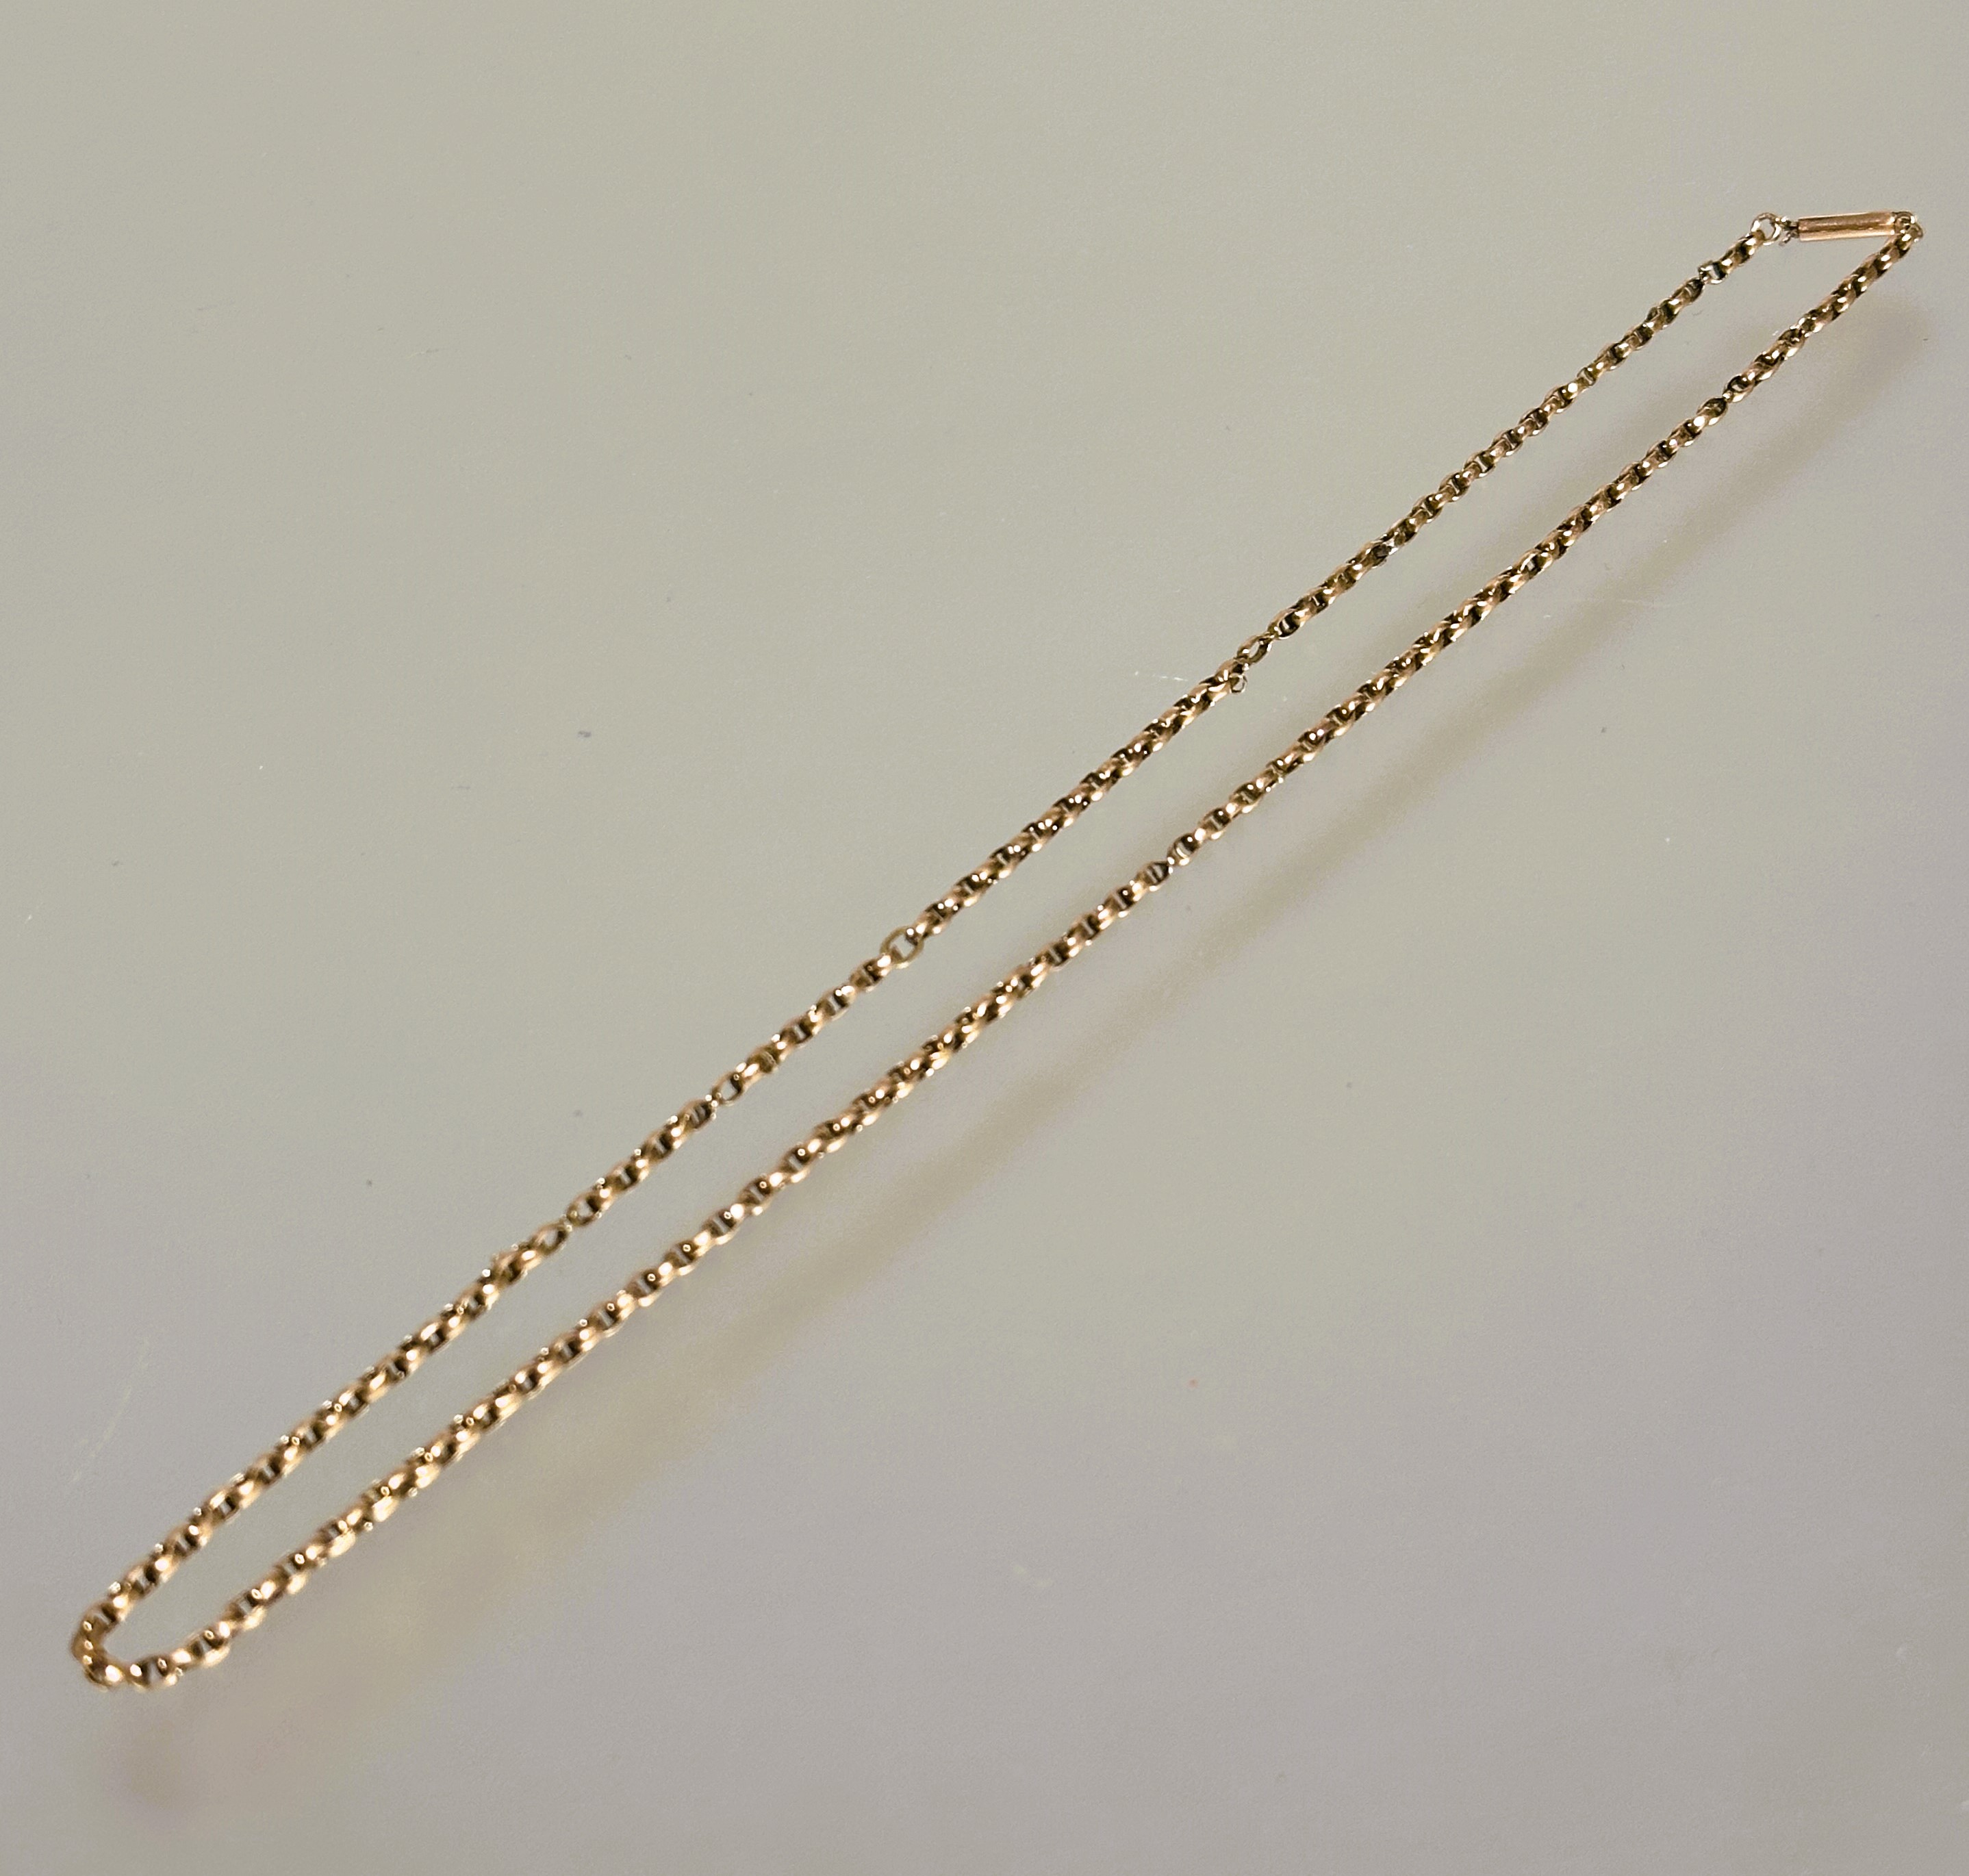 A Edwardian 9ct gold belcher link chain necklace with barrel clasp fastening L x 24cm